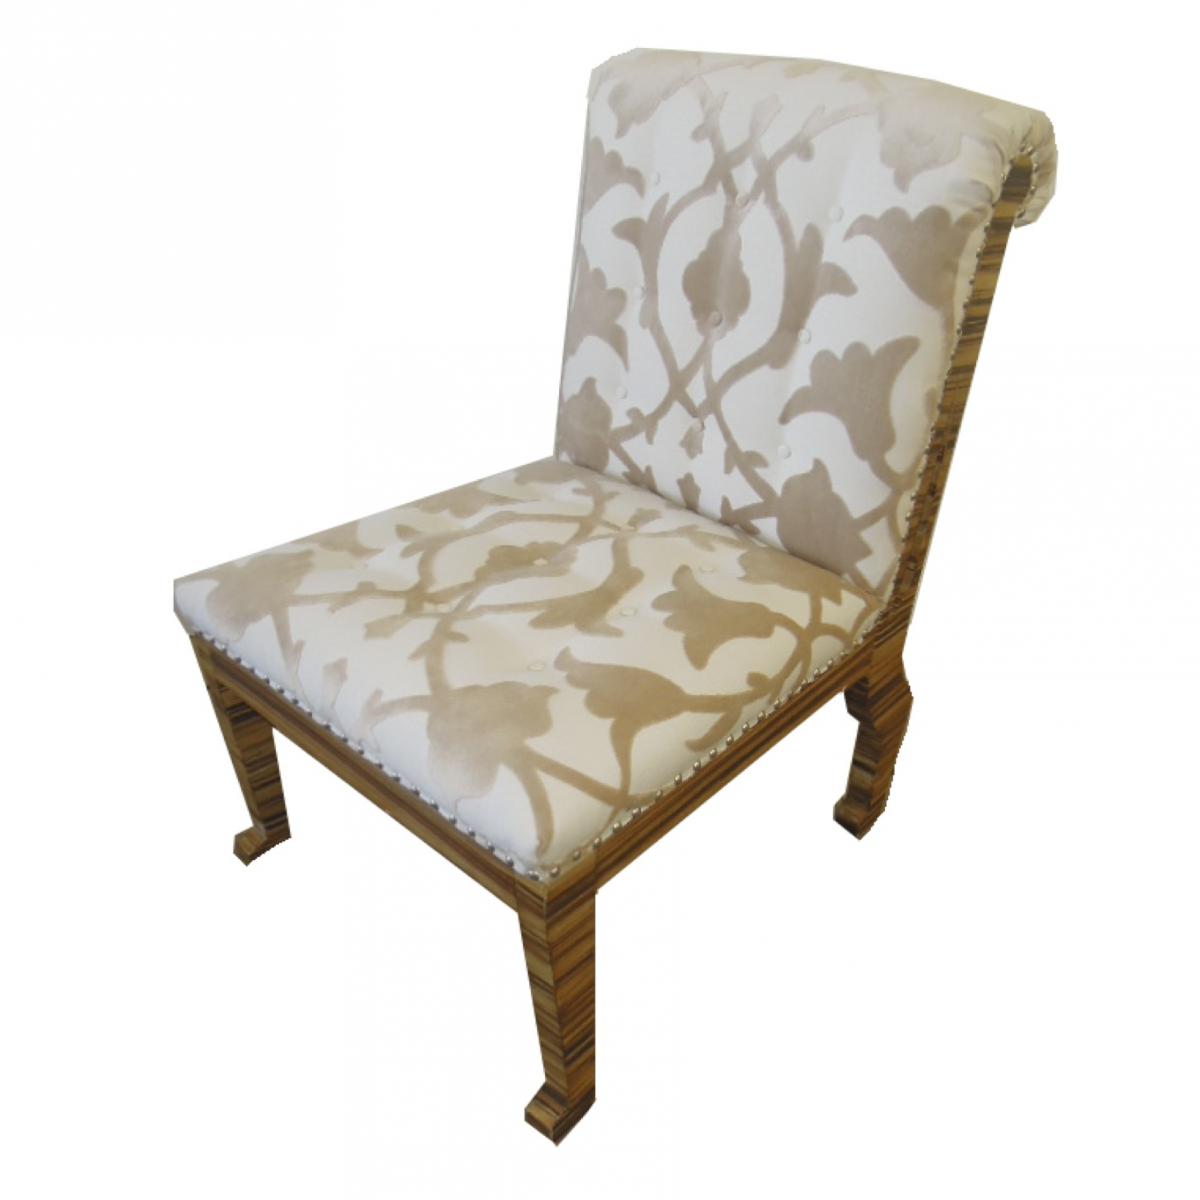 Armless chair reupholstered in cream fabric with tufting